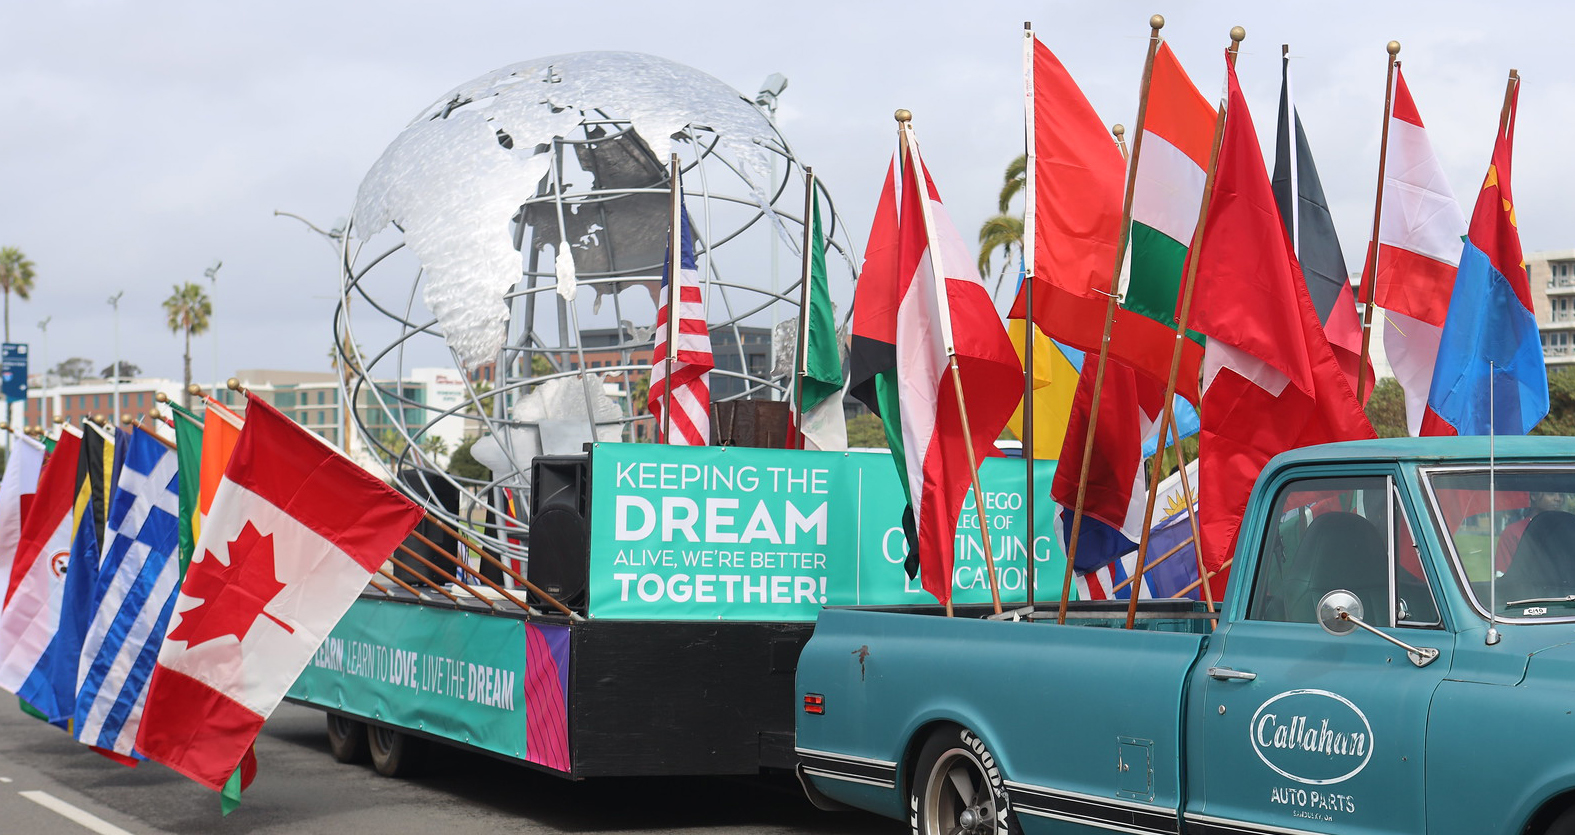 The parade float shows a metal spinning globe designed by welding students. There are several colorful flags from around the world surrounding the globe.